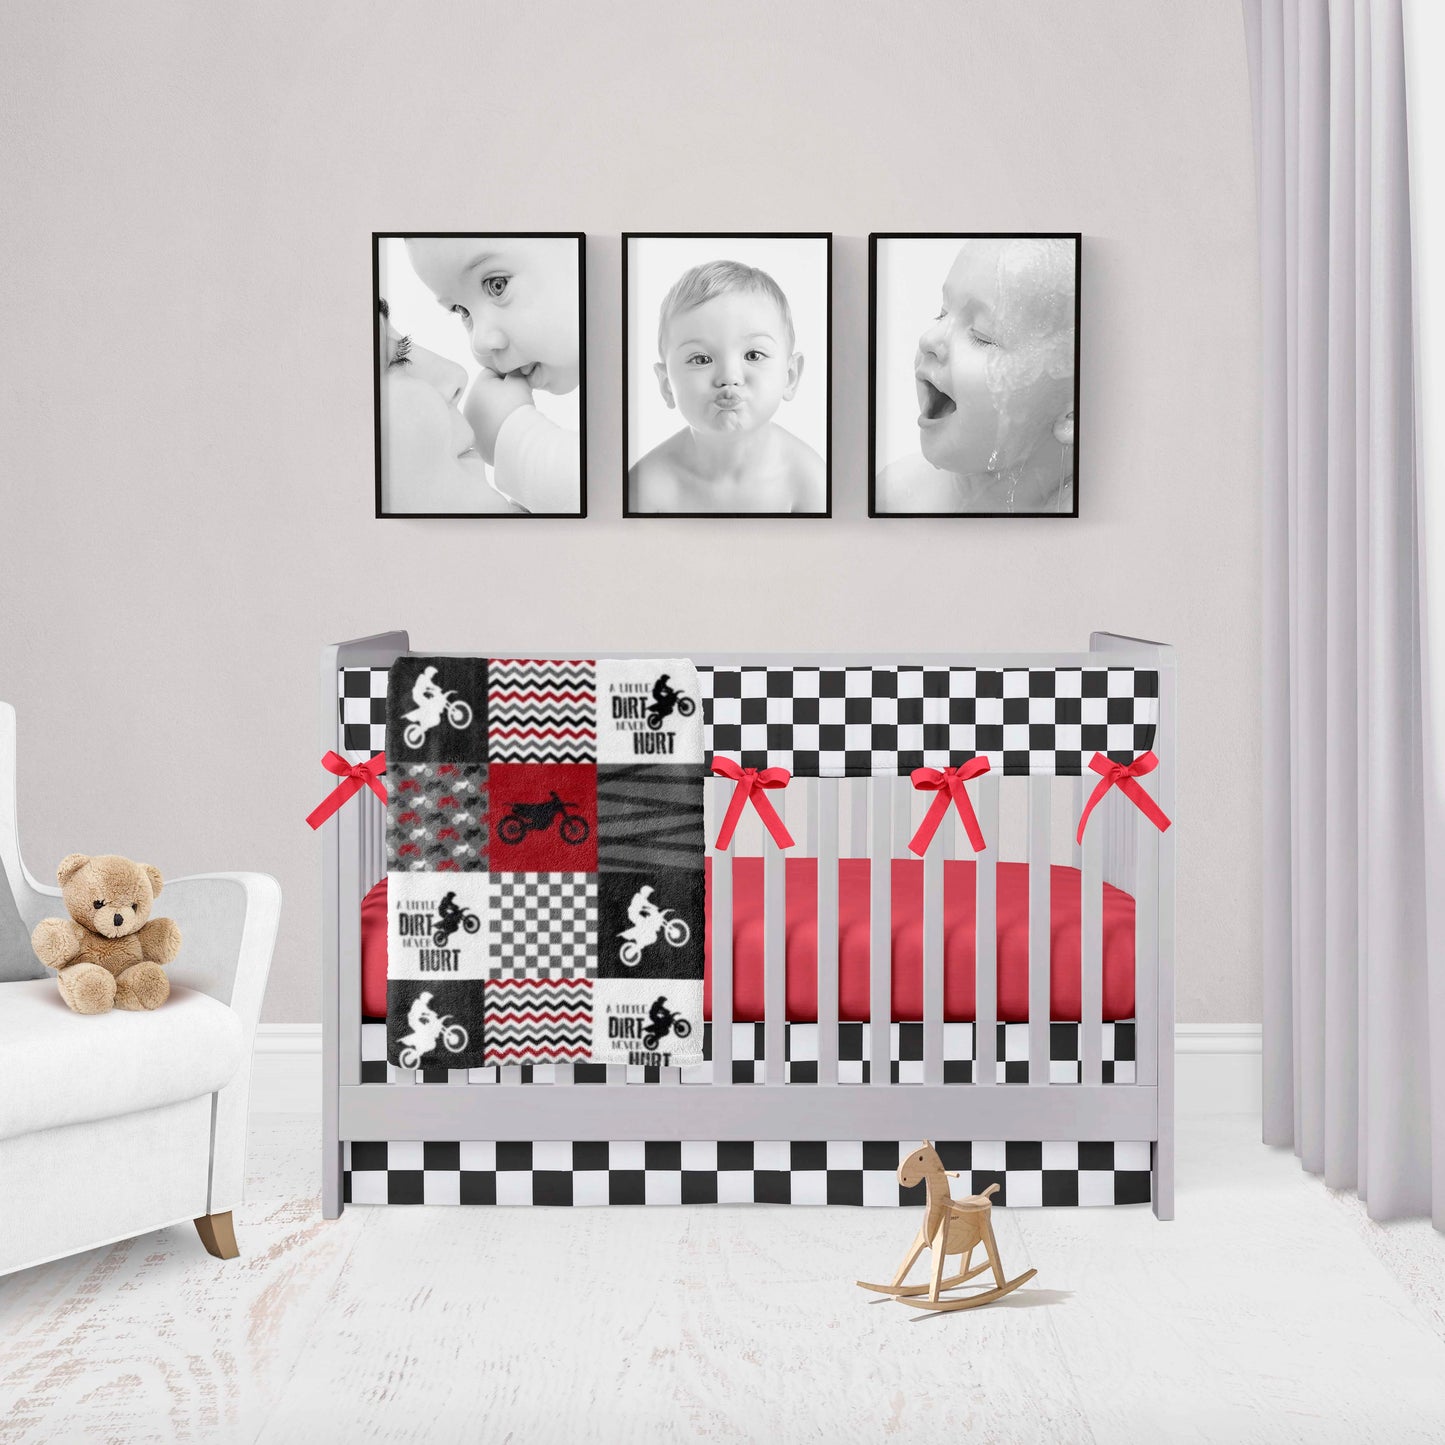 red motocross crib bedding set, minky blanket, racing rail cover with red ties, racing crib skirt & red crib sheet, 4-piece set or 5-piece set with changing pad cover